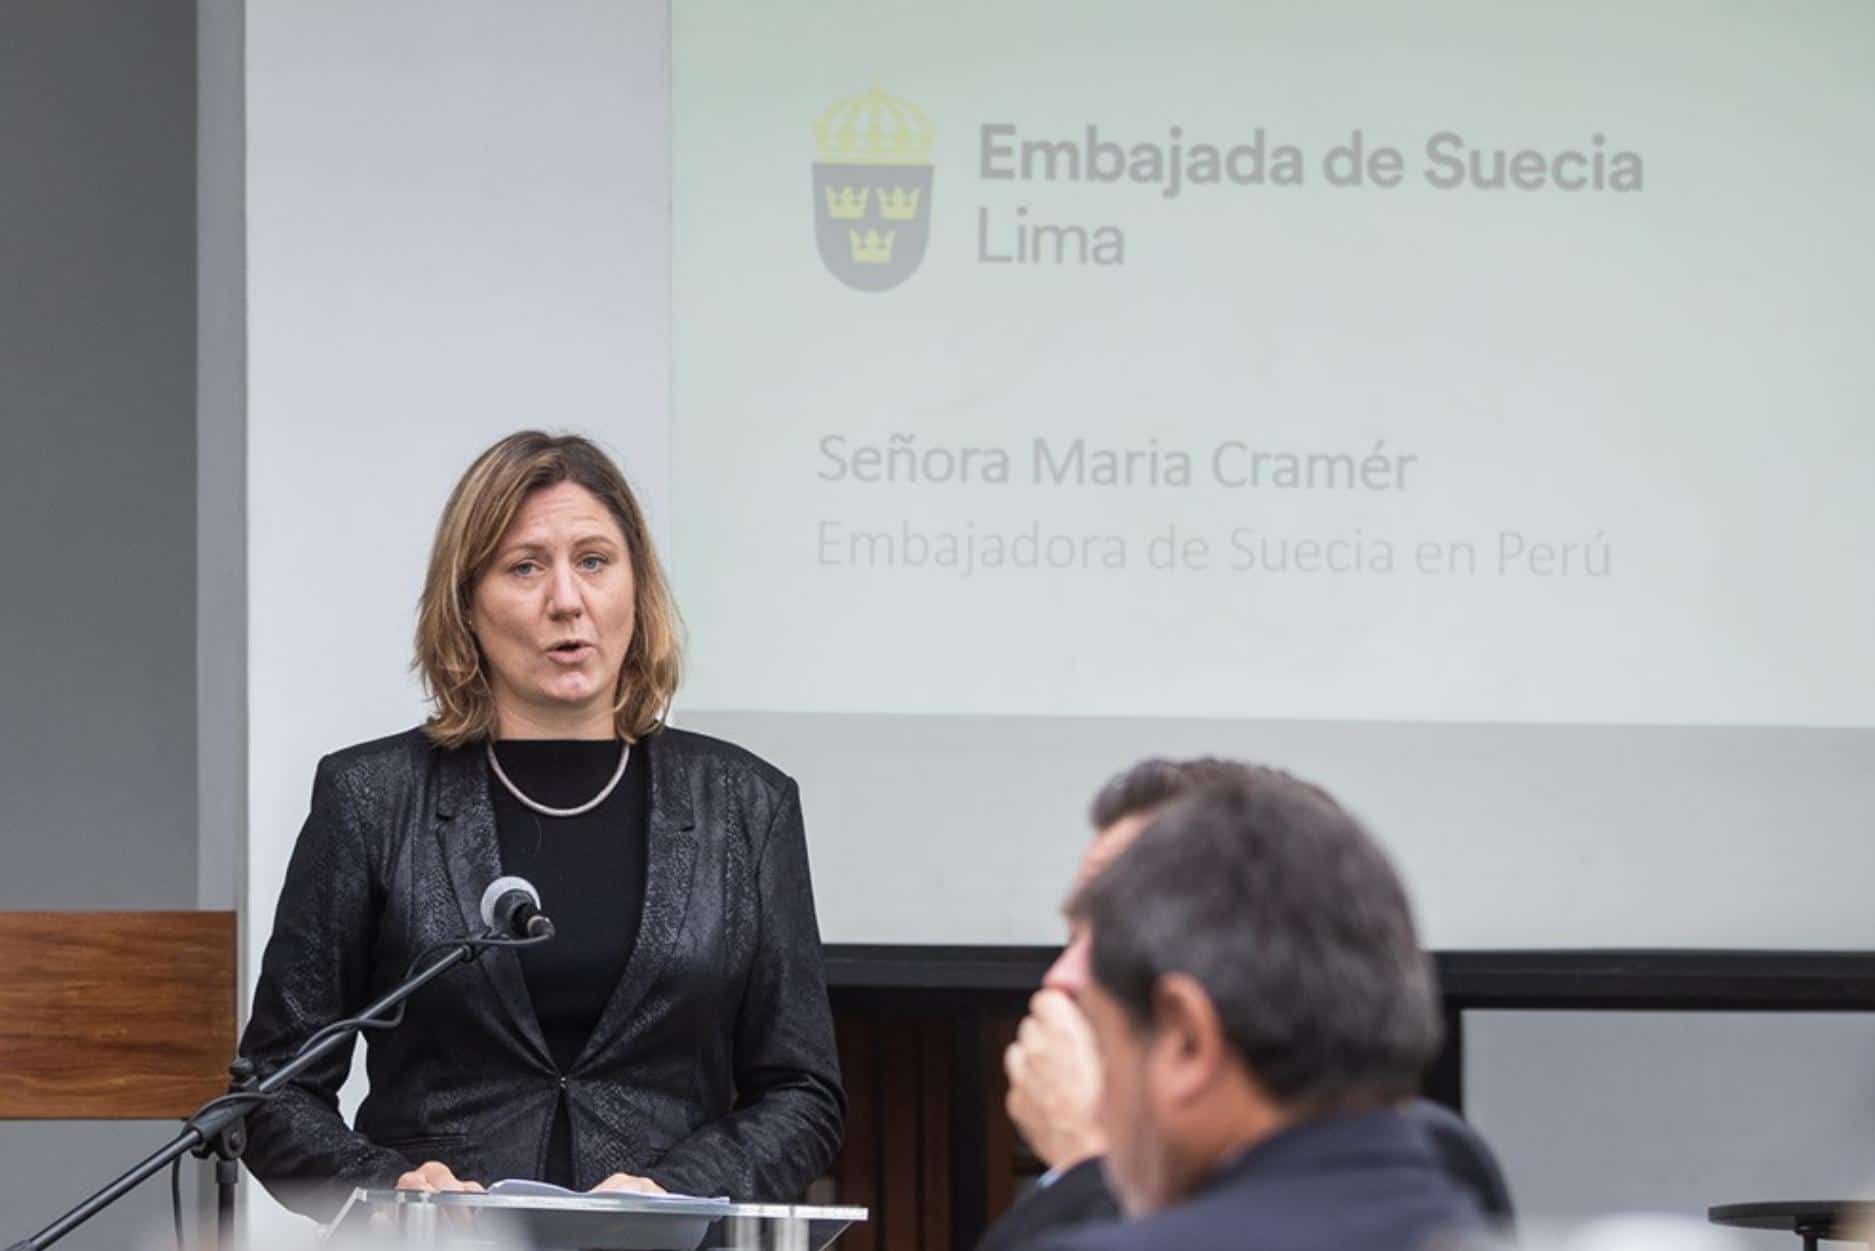 Swedish, Swedish Ambassador after announcing its Embassy closure: &#8220;Peru will continue to be a valued partner&#8221;